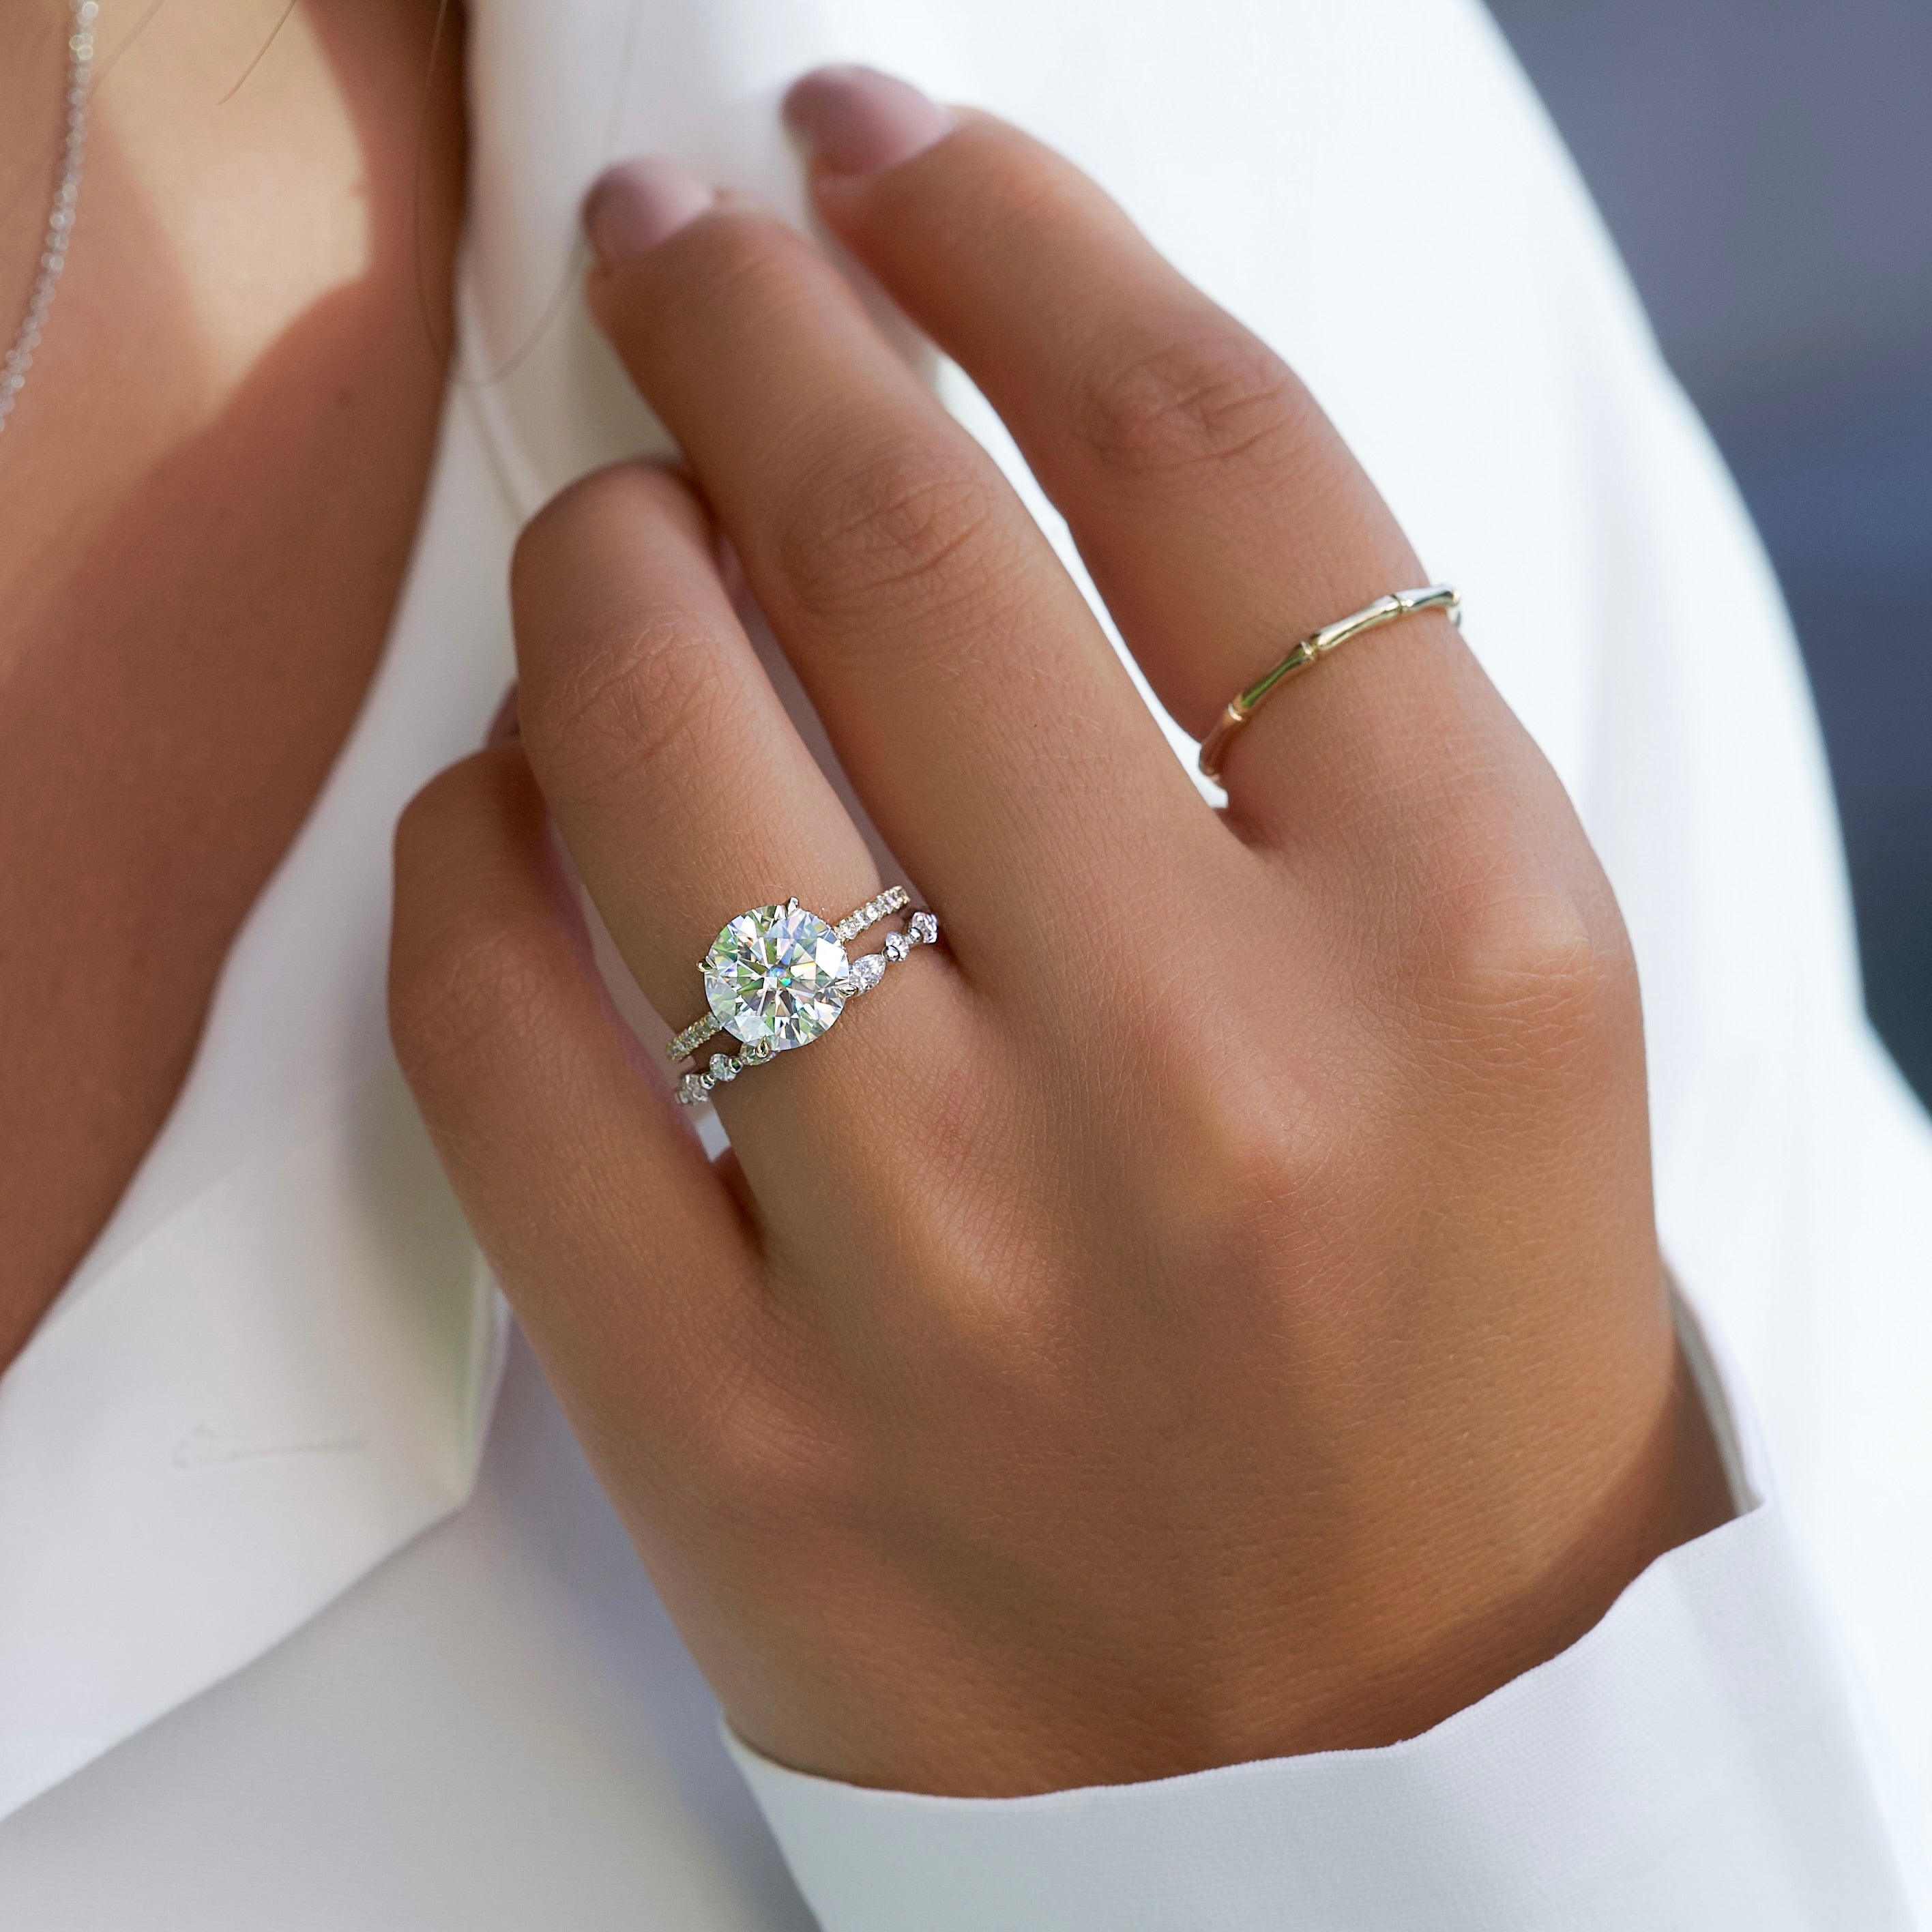 How to Resize an Engagement Ring